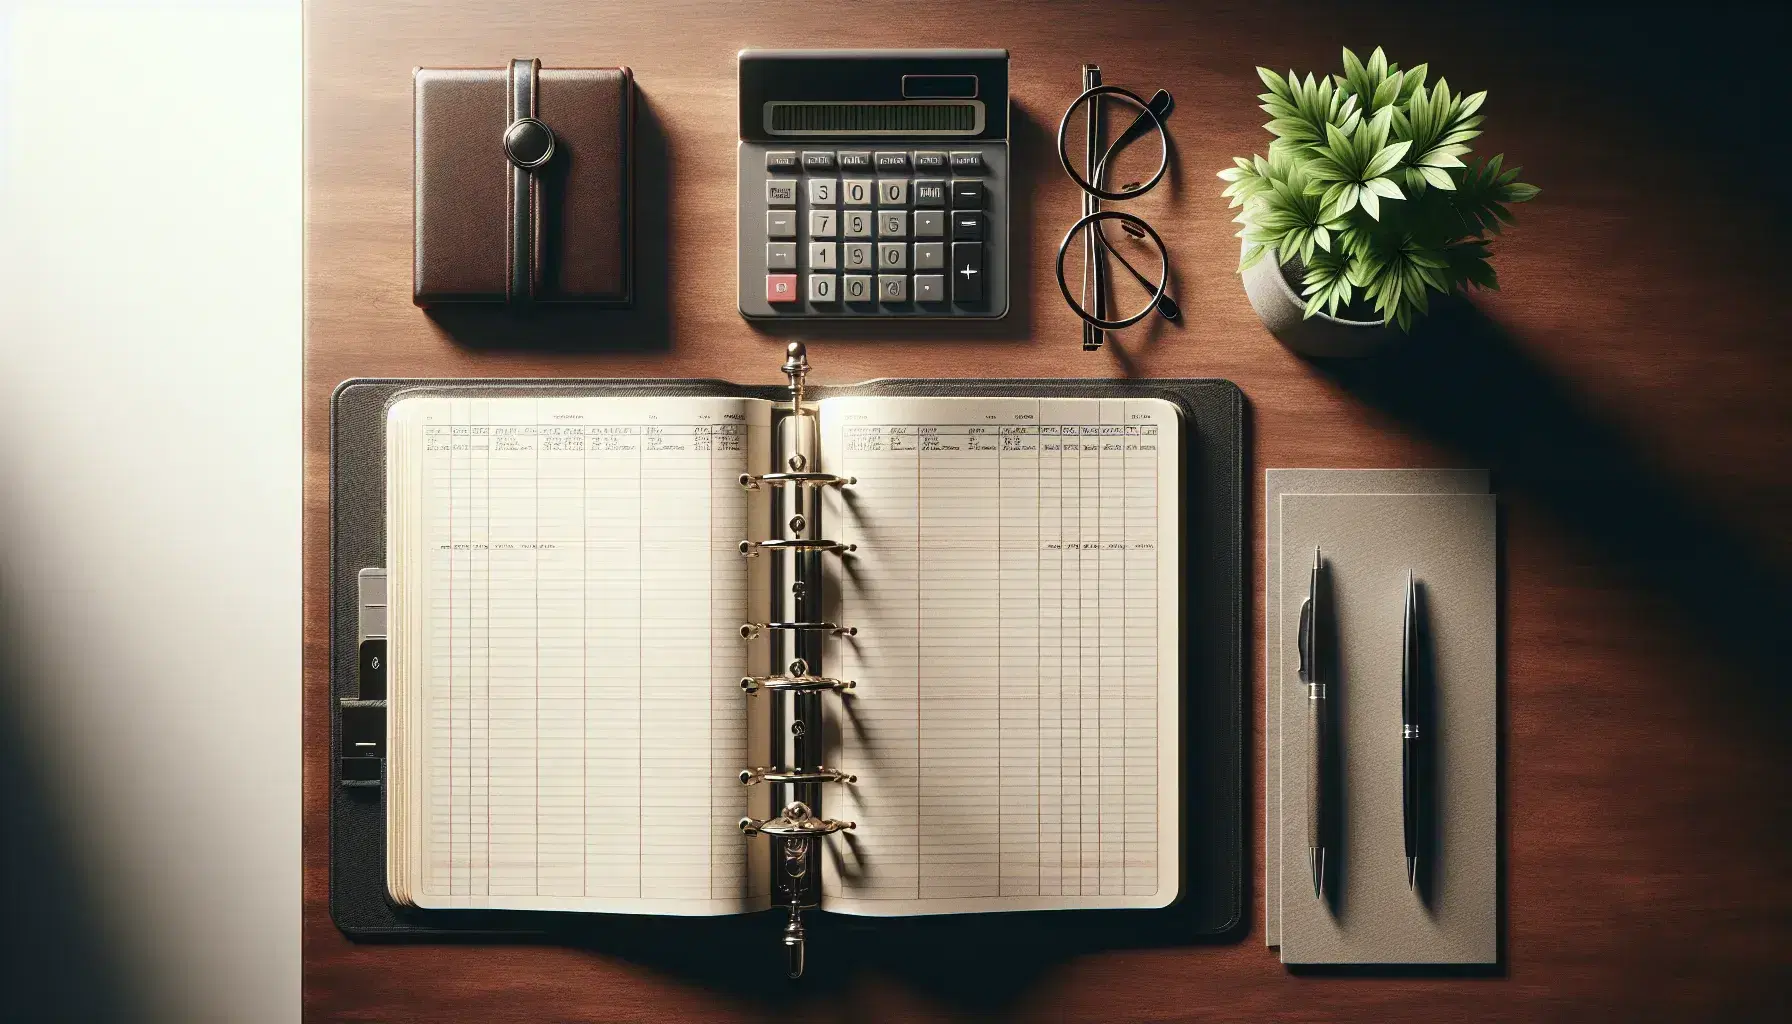 Organized office desk with open ledger book, black calculator, metallic reading glasses, and a small potted plant on a mahogany surface.